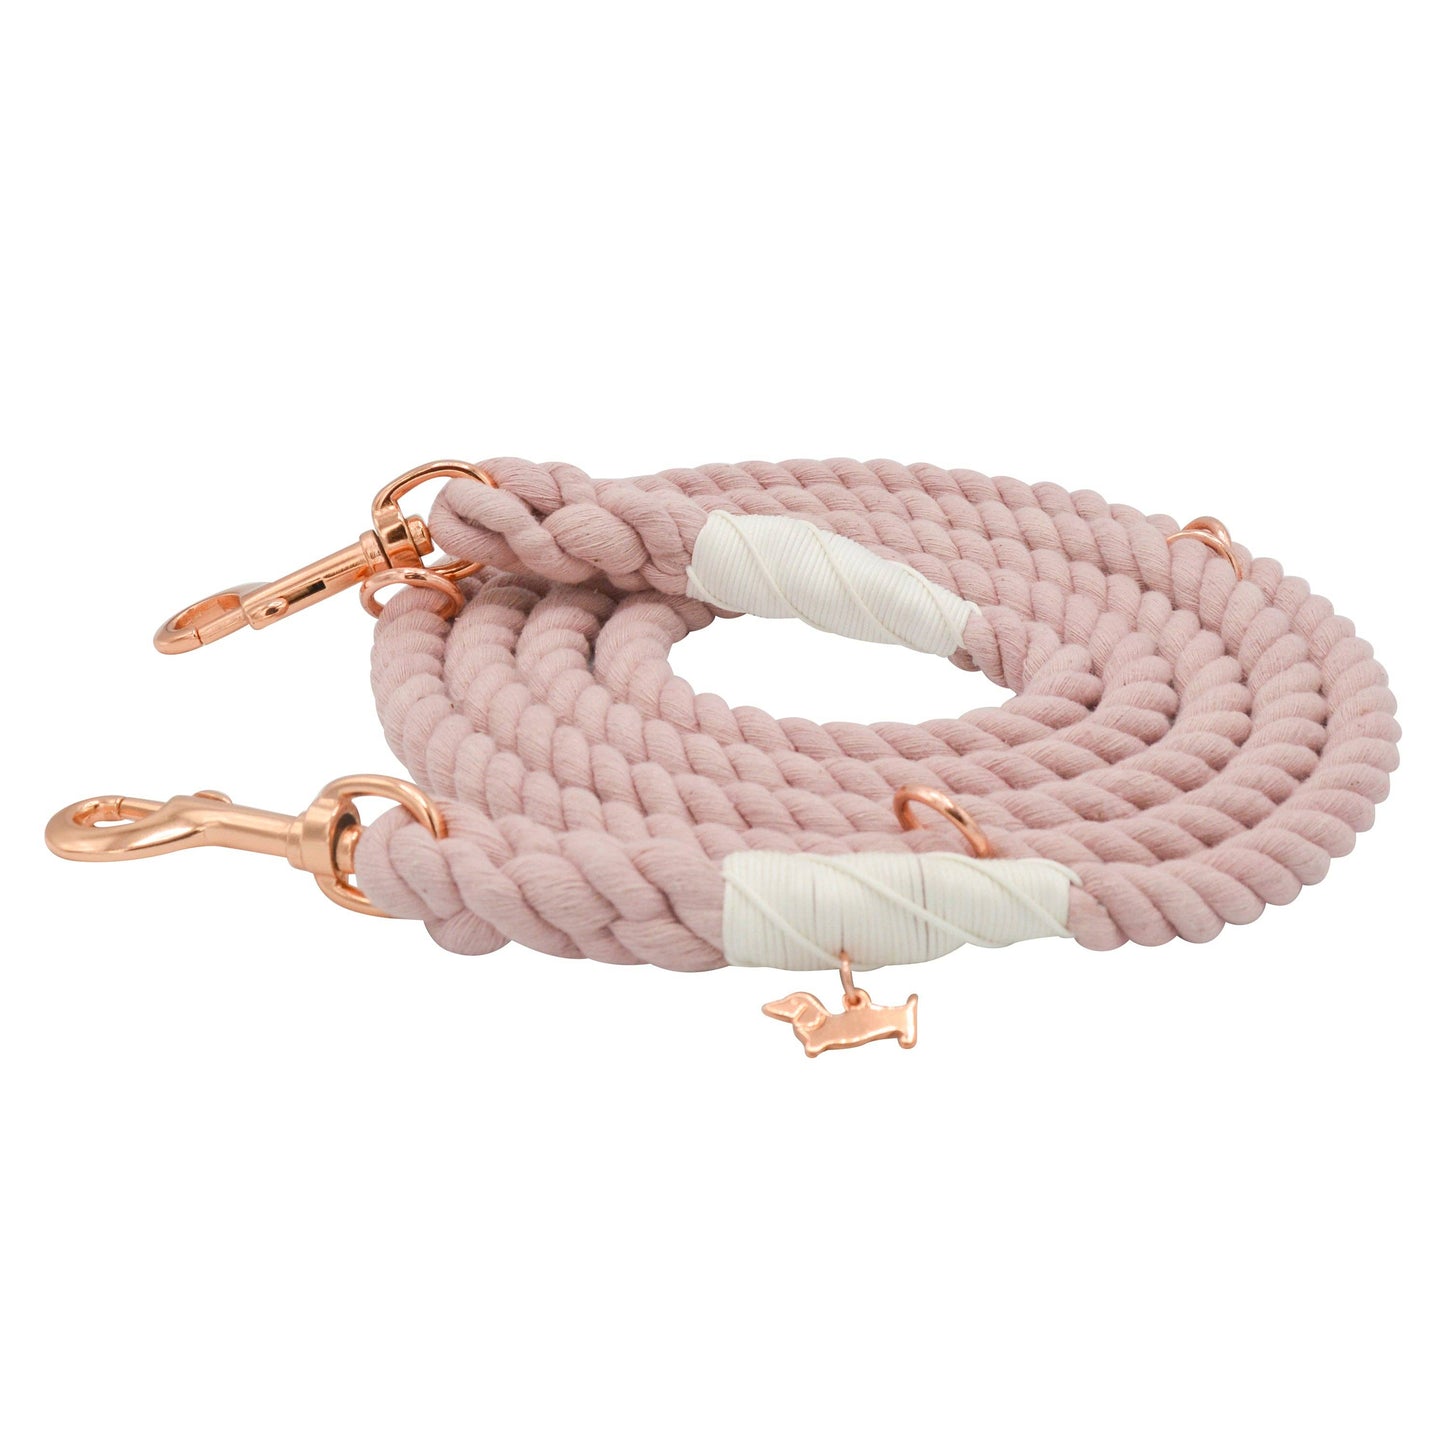 Hands Free Rope Leash - Rose All Day: 7 feet